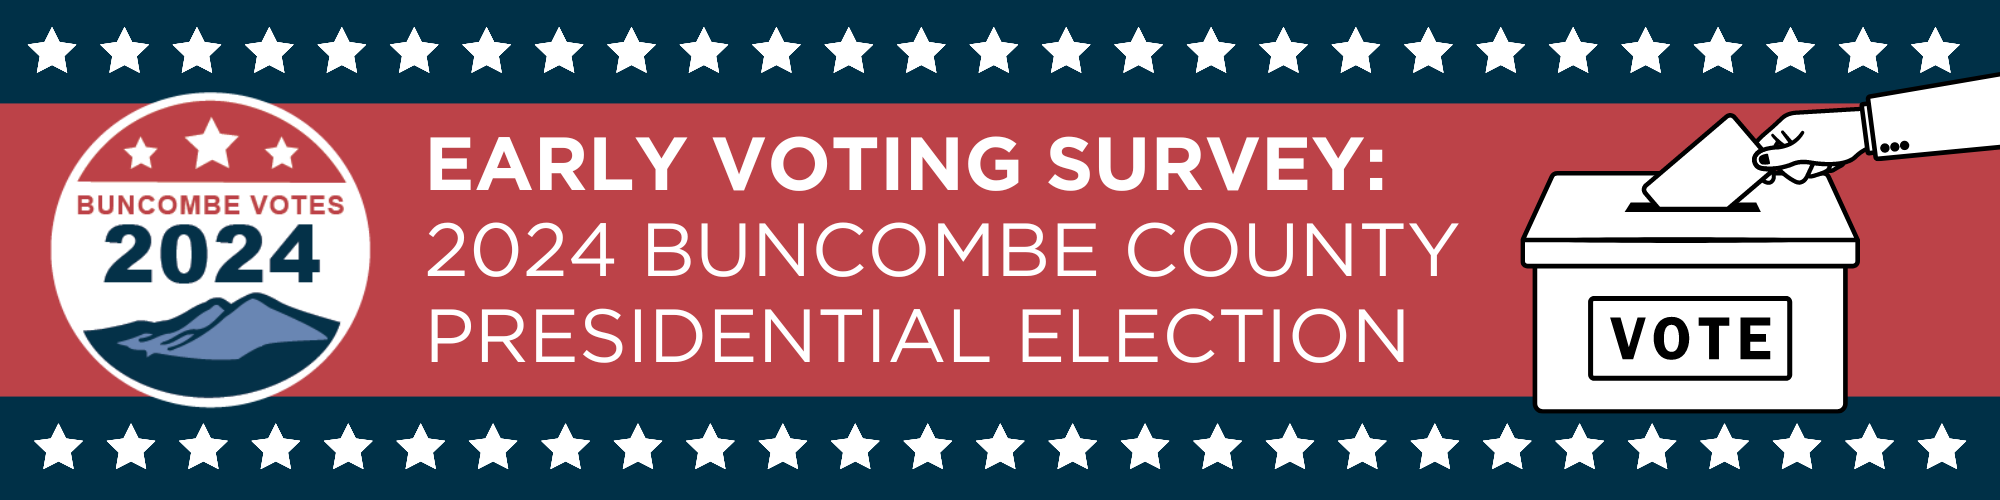 Early Voting Survey: 2024 Buncombe County Presidential Election